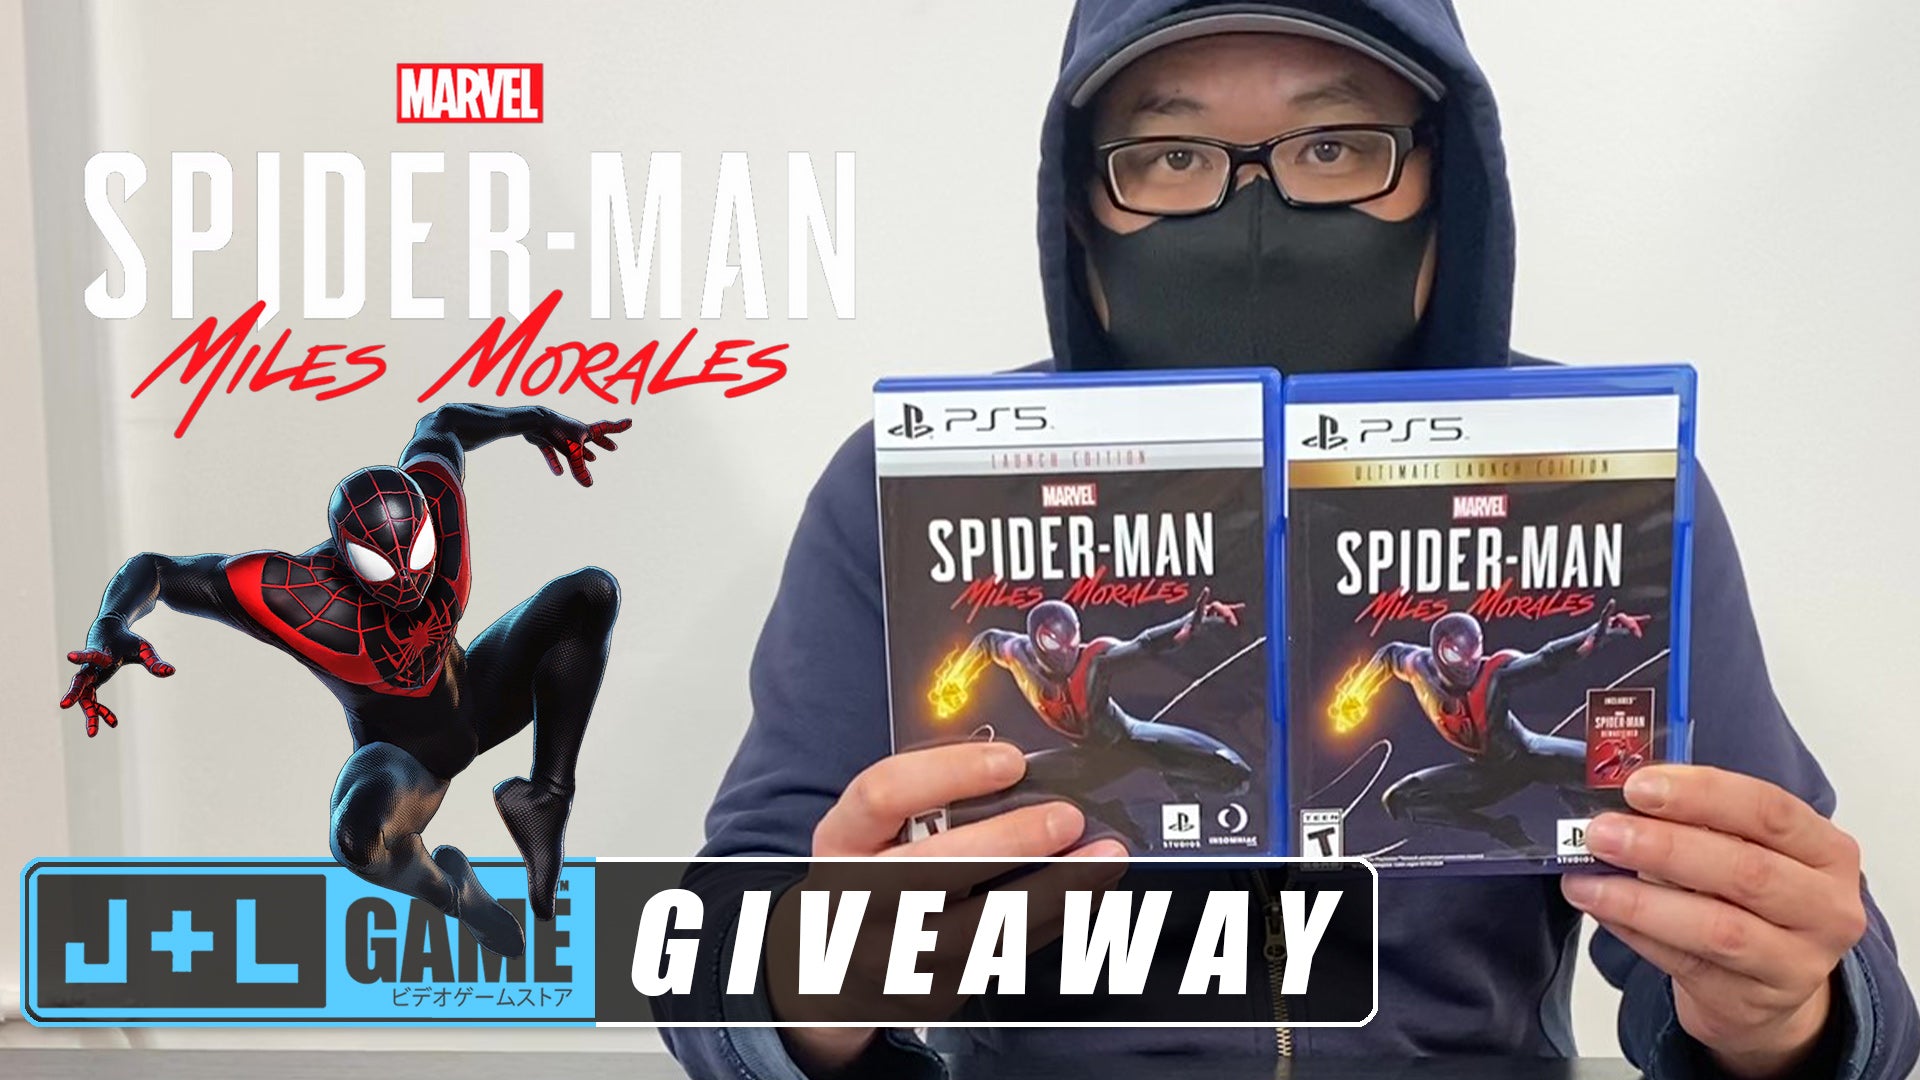 Marvel's Spider-Man Miles Morales LUE and LE Giveaway